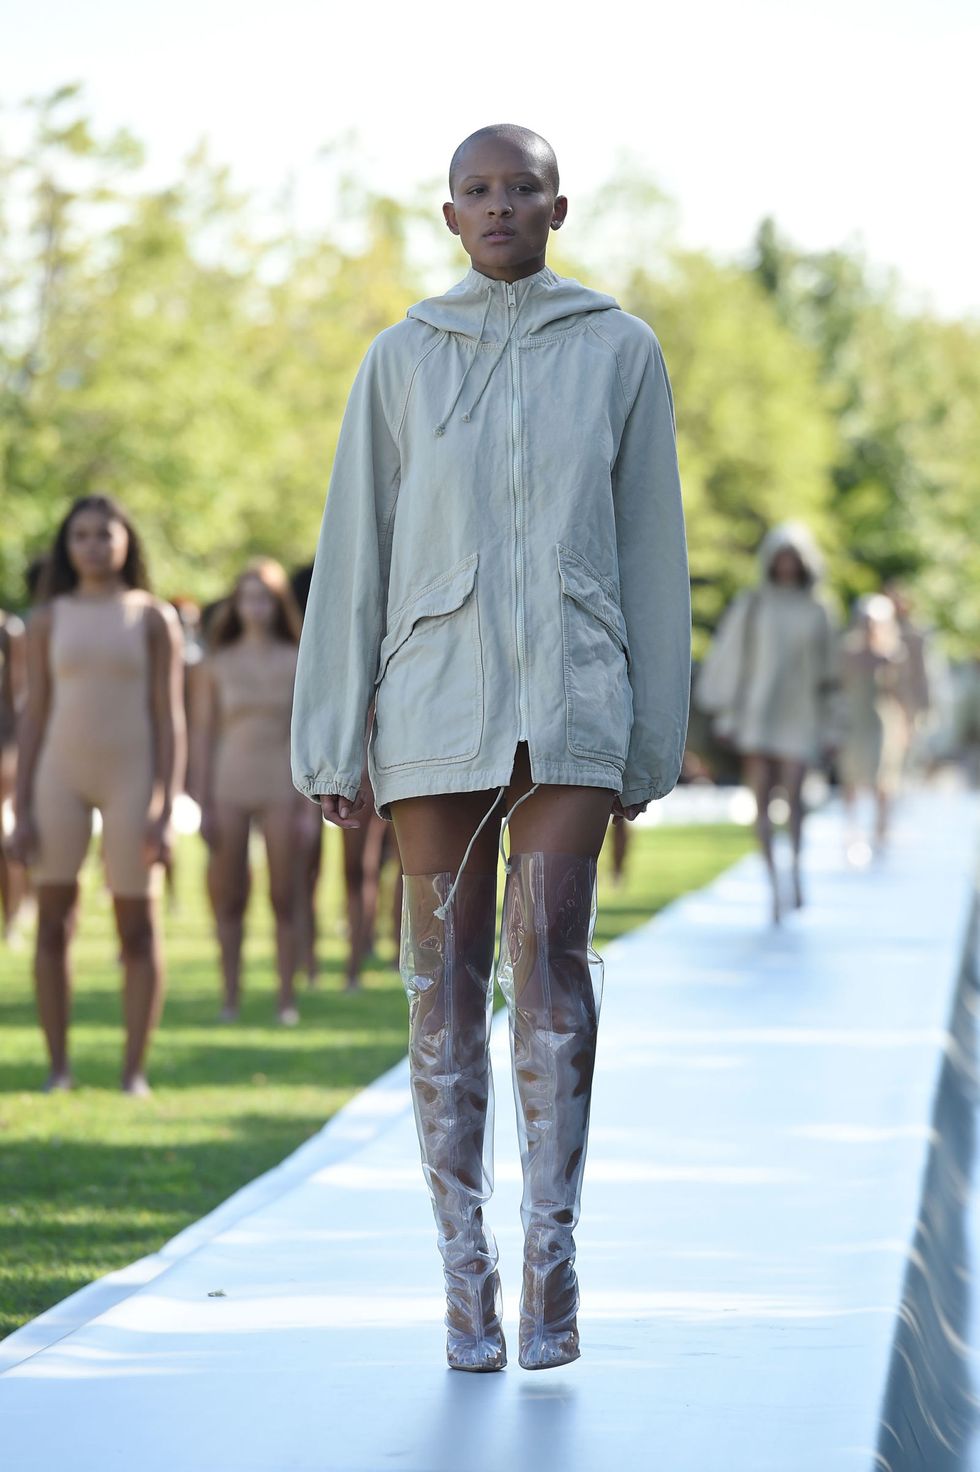 NEW YORK, NY - SEPTEMBER 07:  A model walks the runway at the Kanye West Yeezy Season 4 fashion show on September 7, 2016 in New York City.  (Photo by Dimitrios Kambouris/Getty Images for Yeezy Season 4)